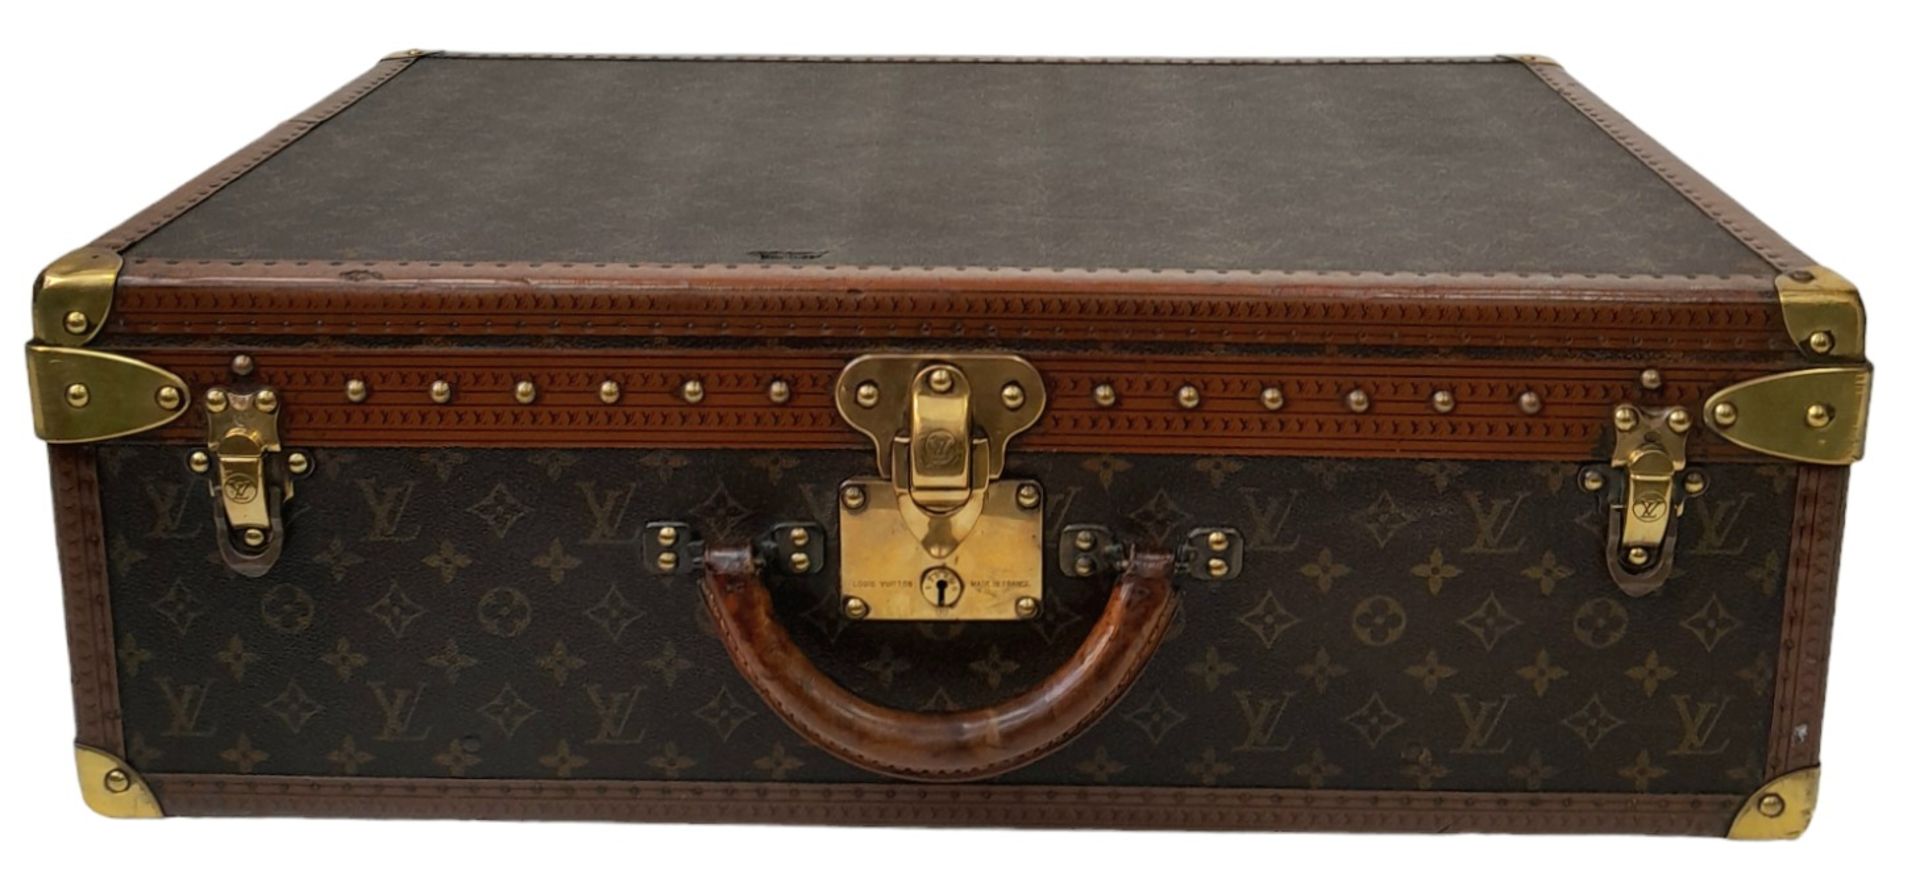 A Vintage Possibly Antique Louis Vuitton Trunk/Hard Suitcase. The smaller brother of Lot 38! - Image 4 of 12